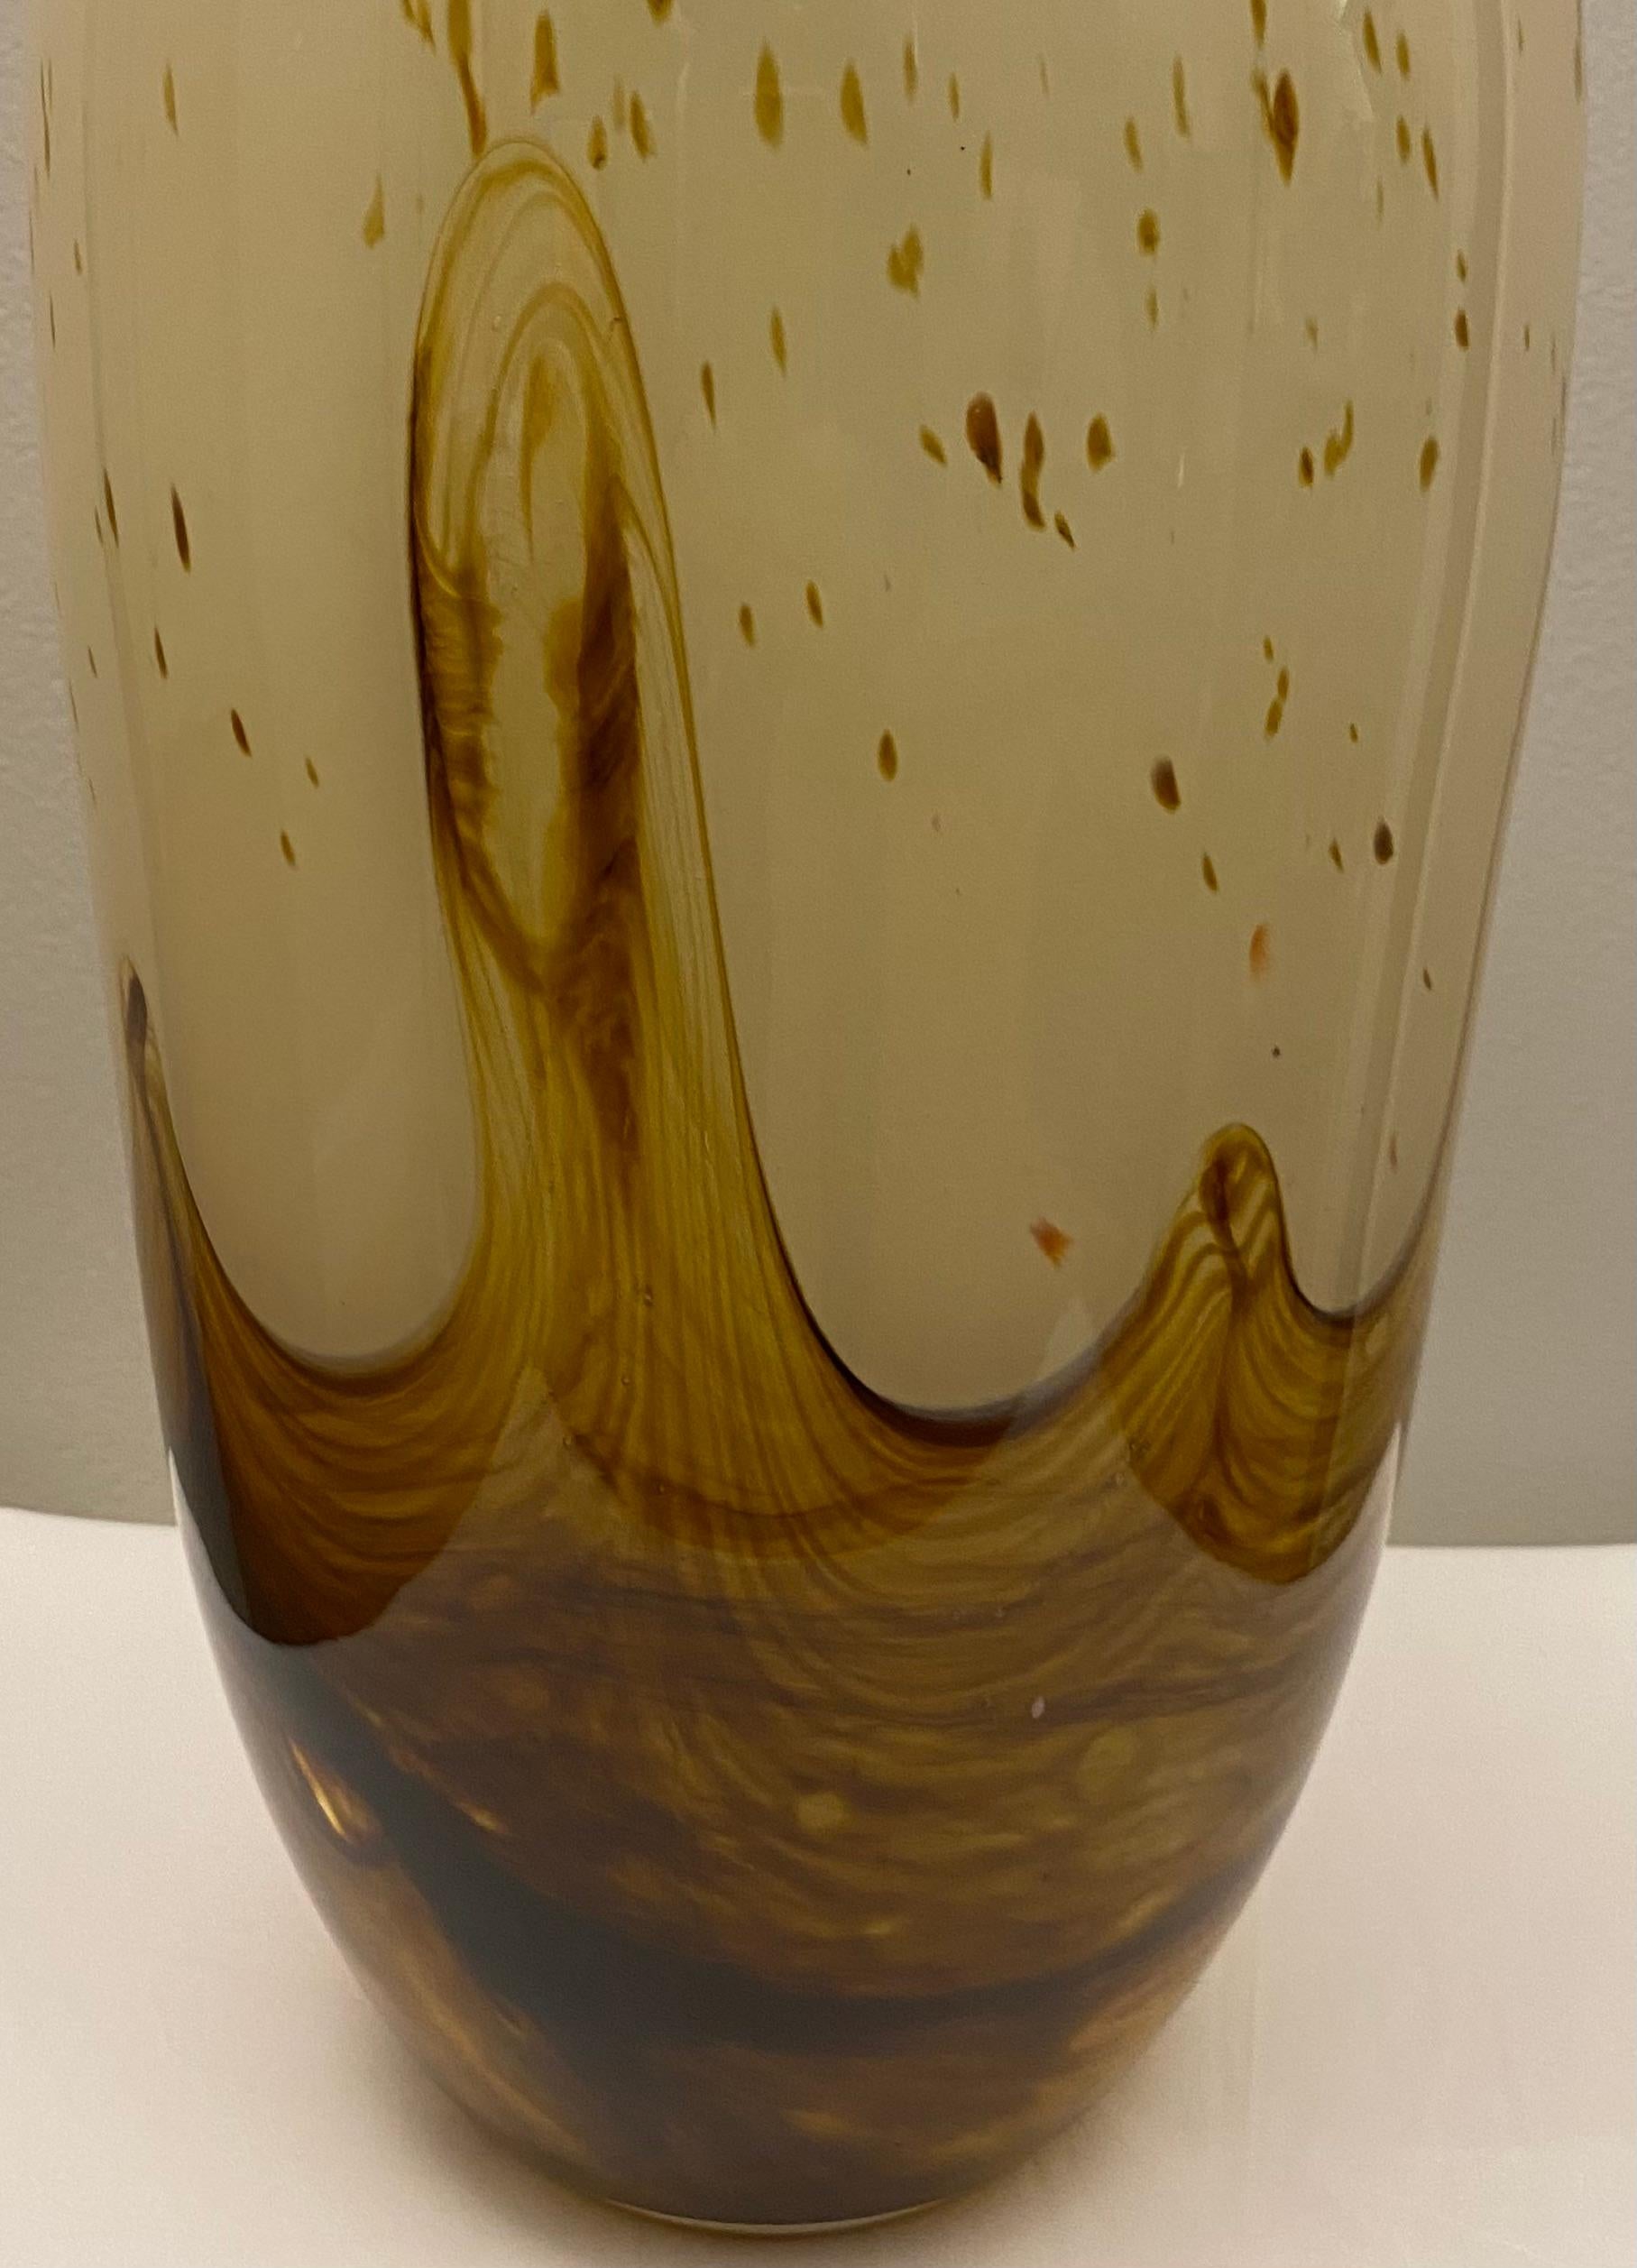 20th Century Large Midcentury Murano Art Glass Vase, Beige & Amber Attrib. to Fratelli Toso For Sale